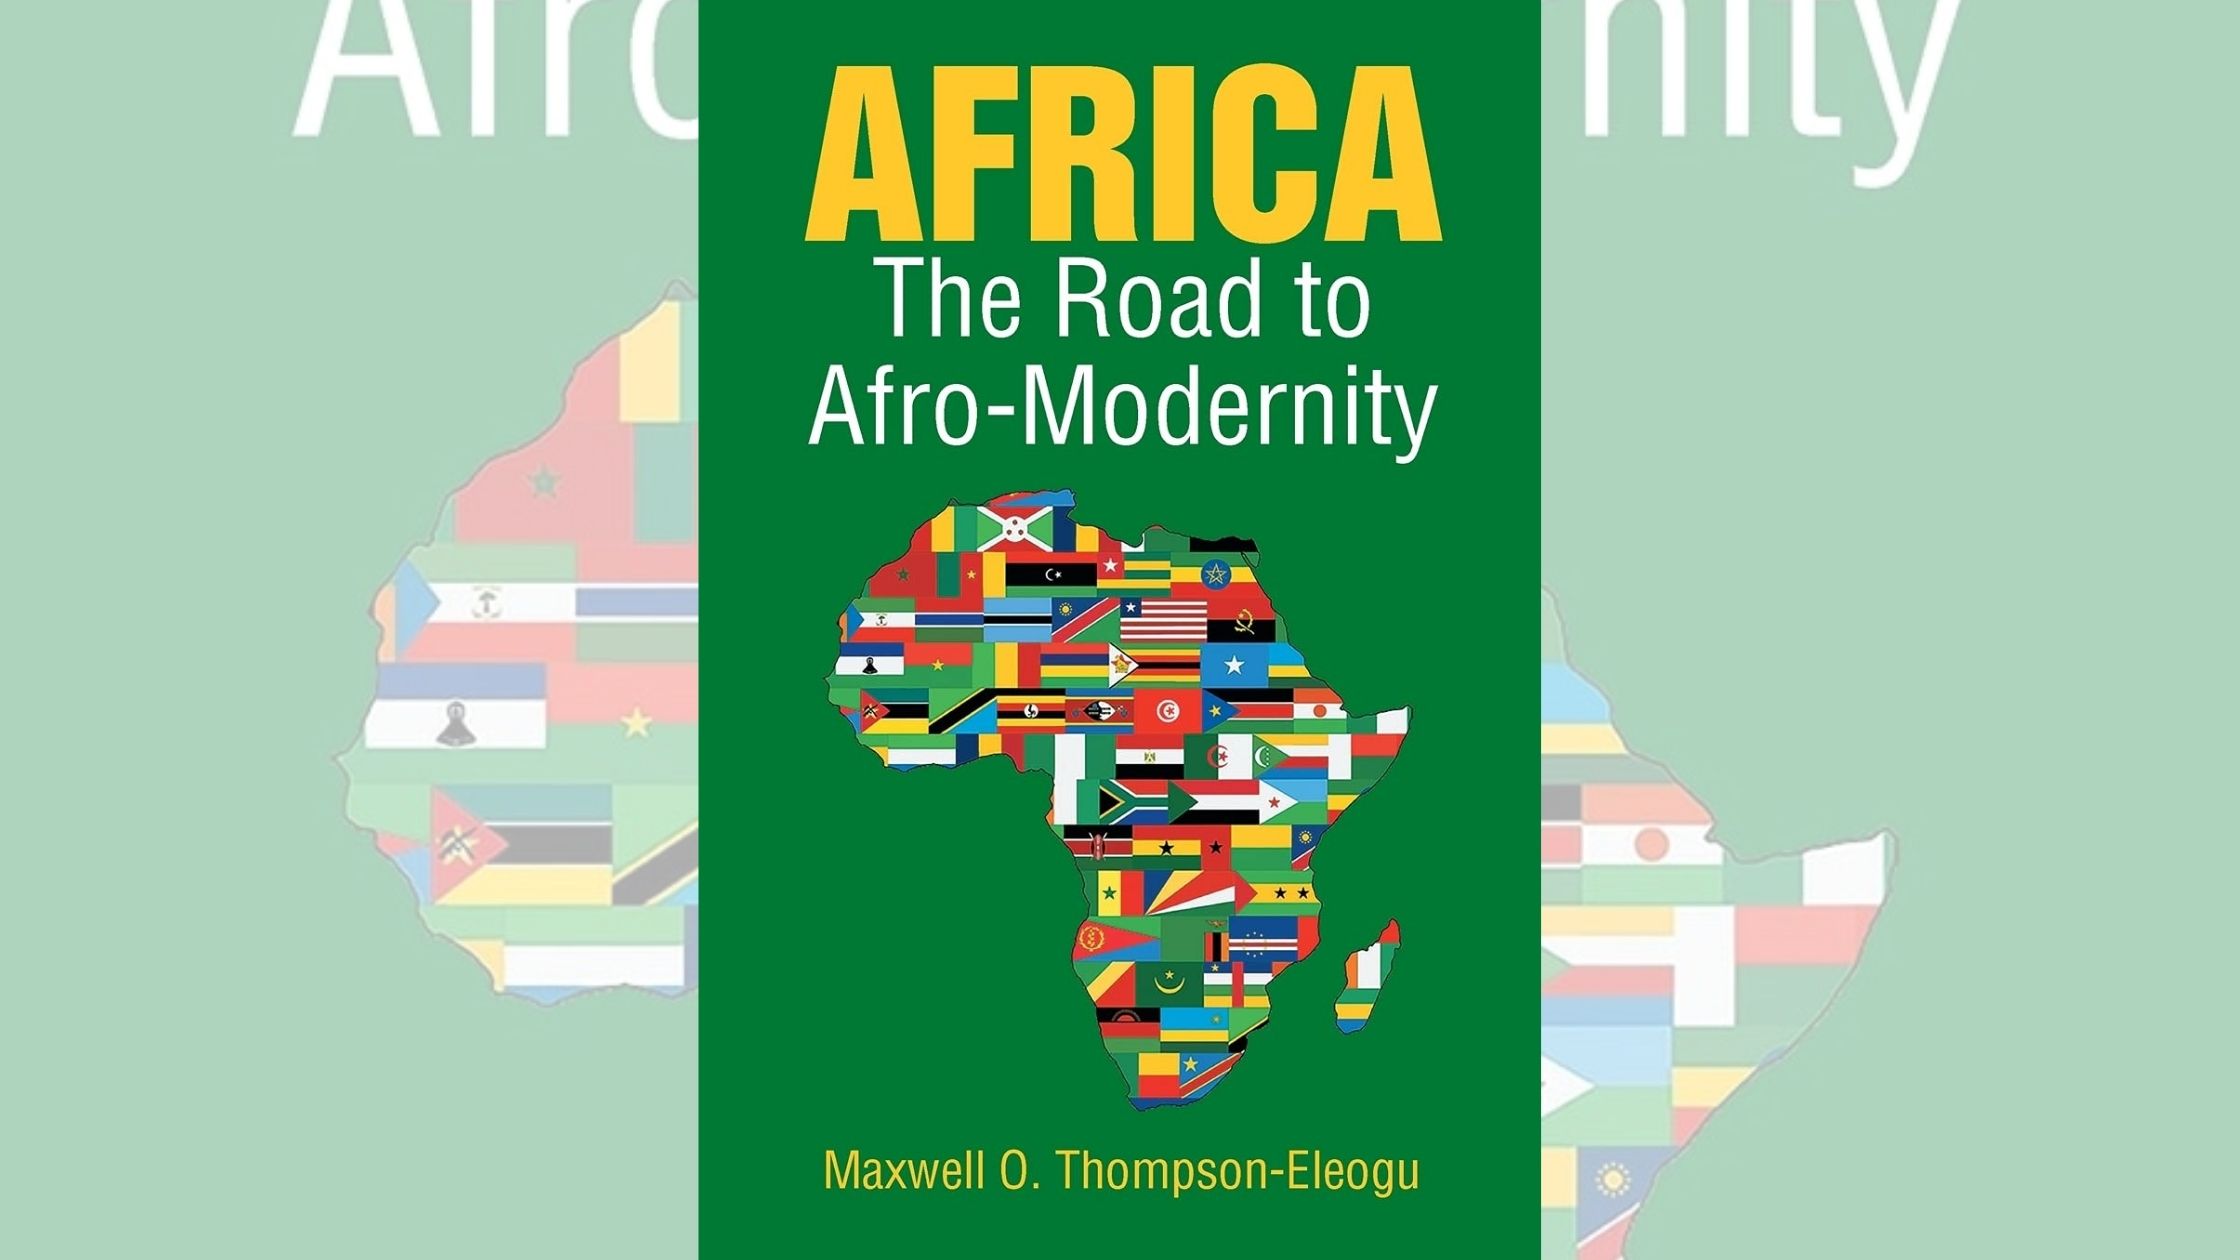 Author Maxwell O. Thompson-Eleogu’s new book “Africa—The Road to Afro-Modernity” is a thought-provoking product of a select and innovative think tank, NobleAfriq